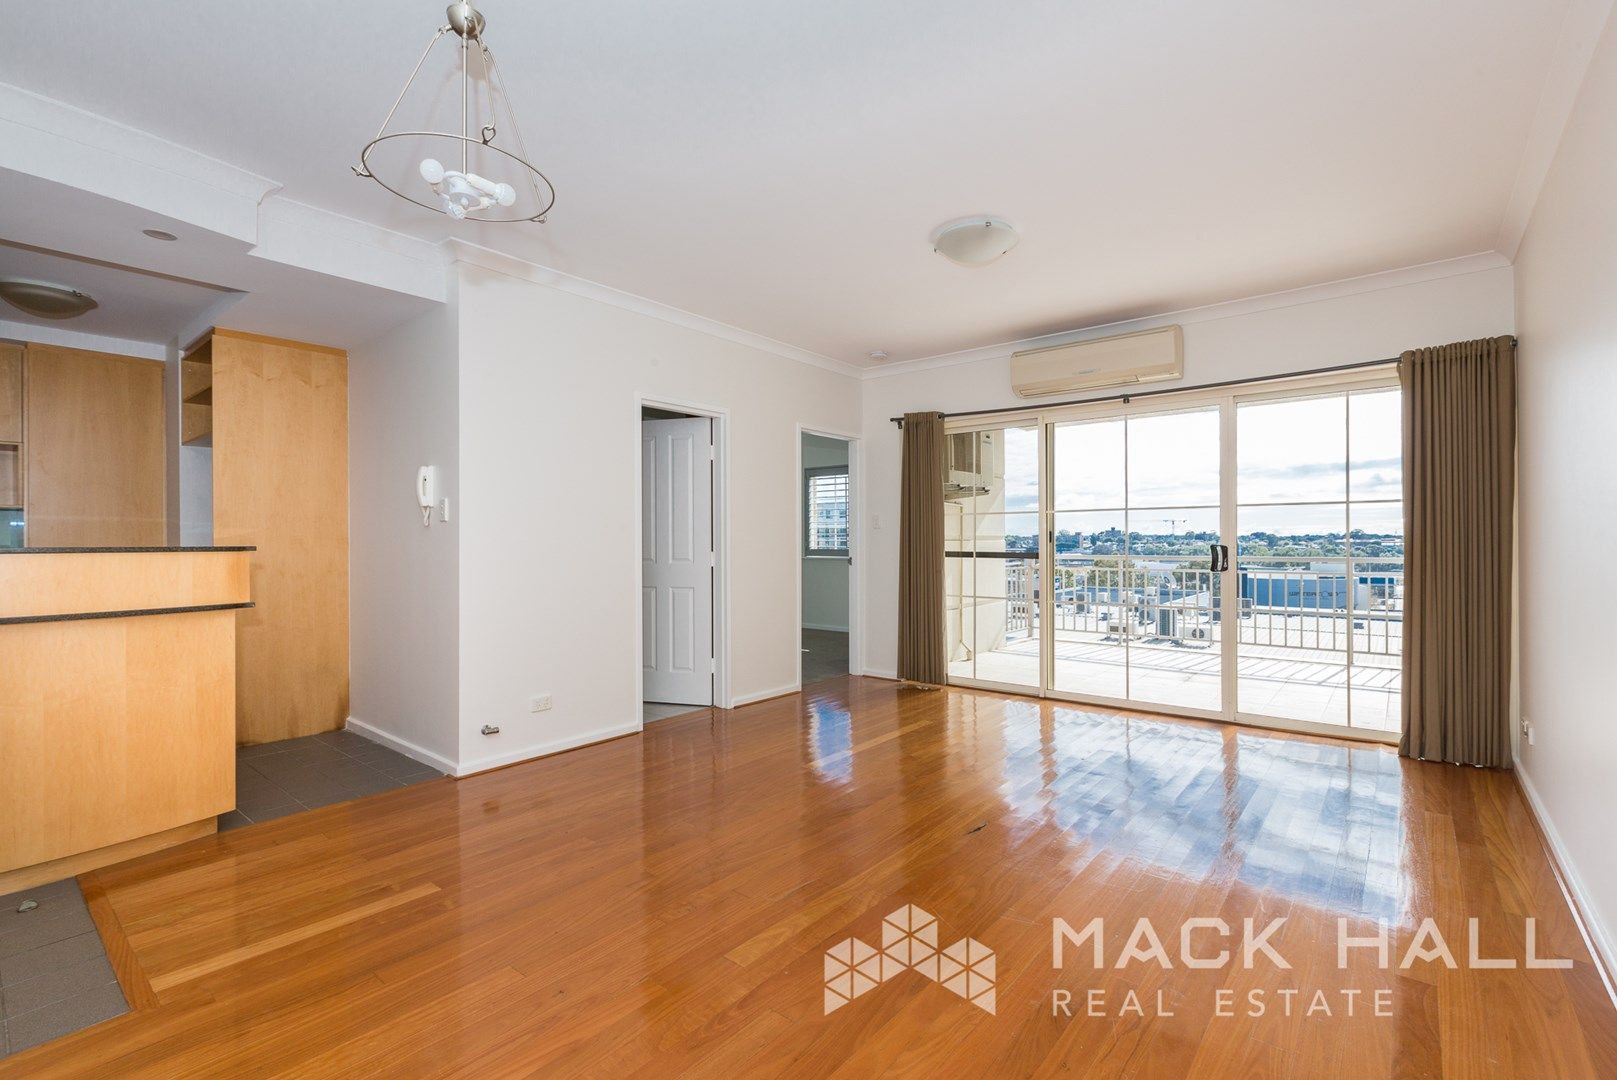 1 bedrooms Apartment / Unit / Flat in 21/611 Murray St WEST PERTH WA, 6005